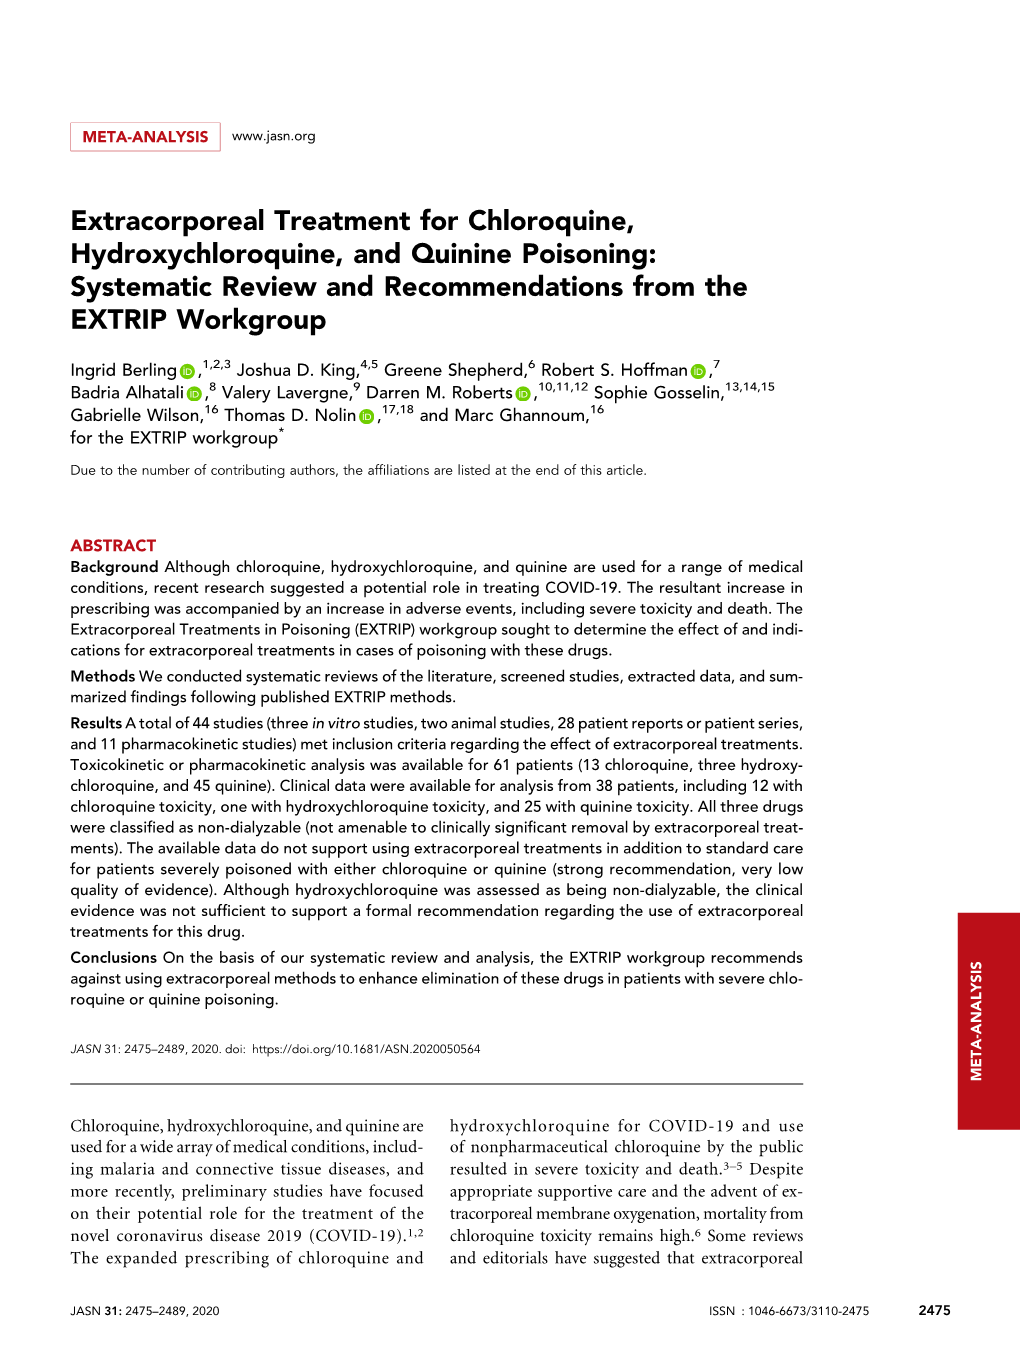 Extracorporeal Treatment for Chloroquine, Hydroxychloroquine, and Quinine Poisoning: Systematic Review and Recommendations from the EXTRIP Workgroup